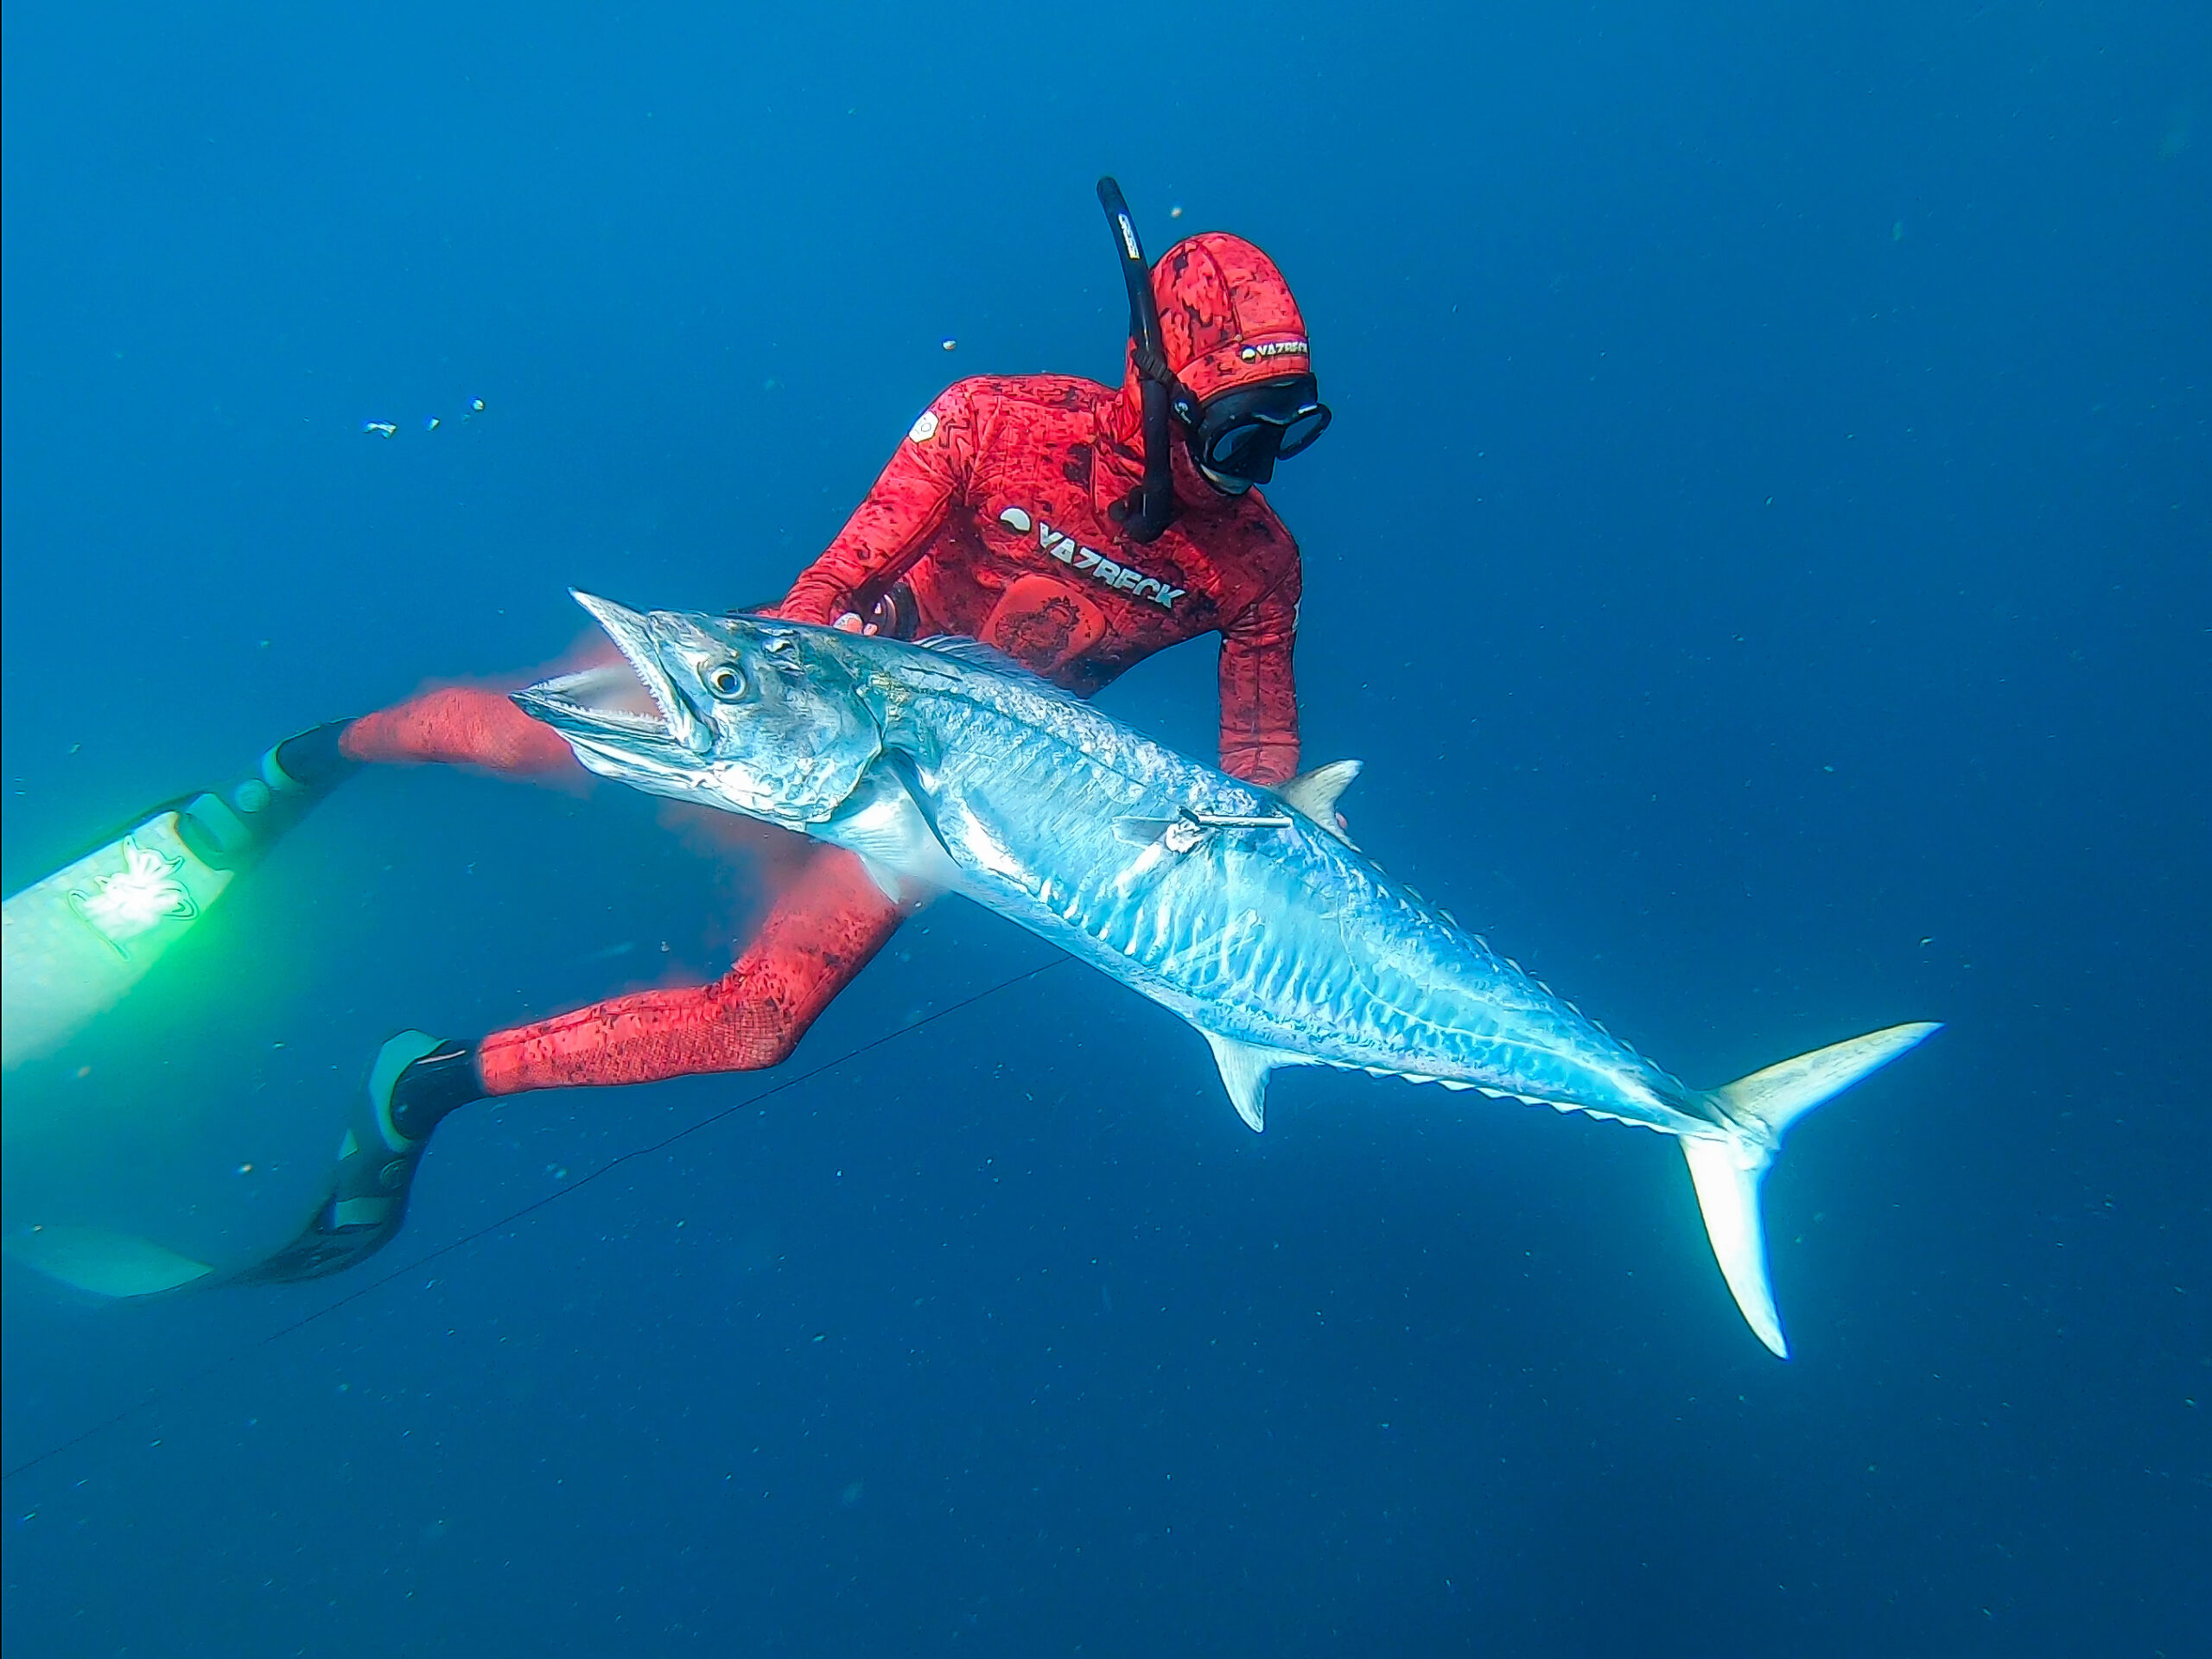 Andy Spearfishing a Mackeral